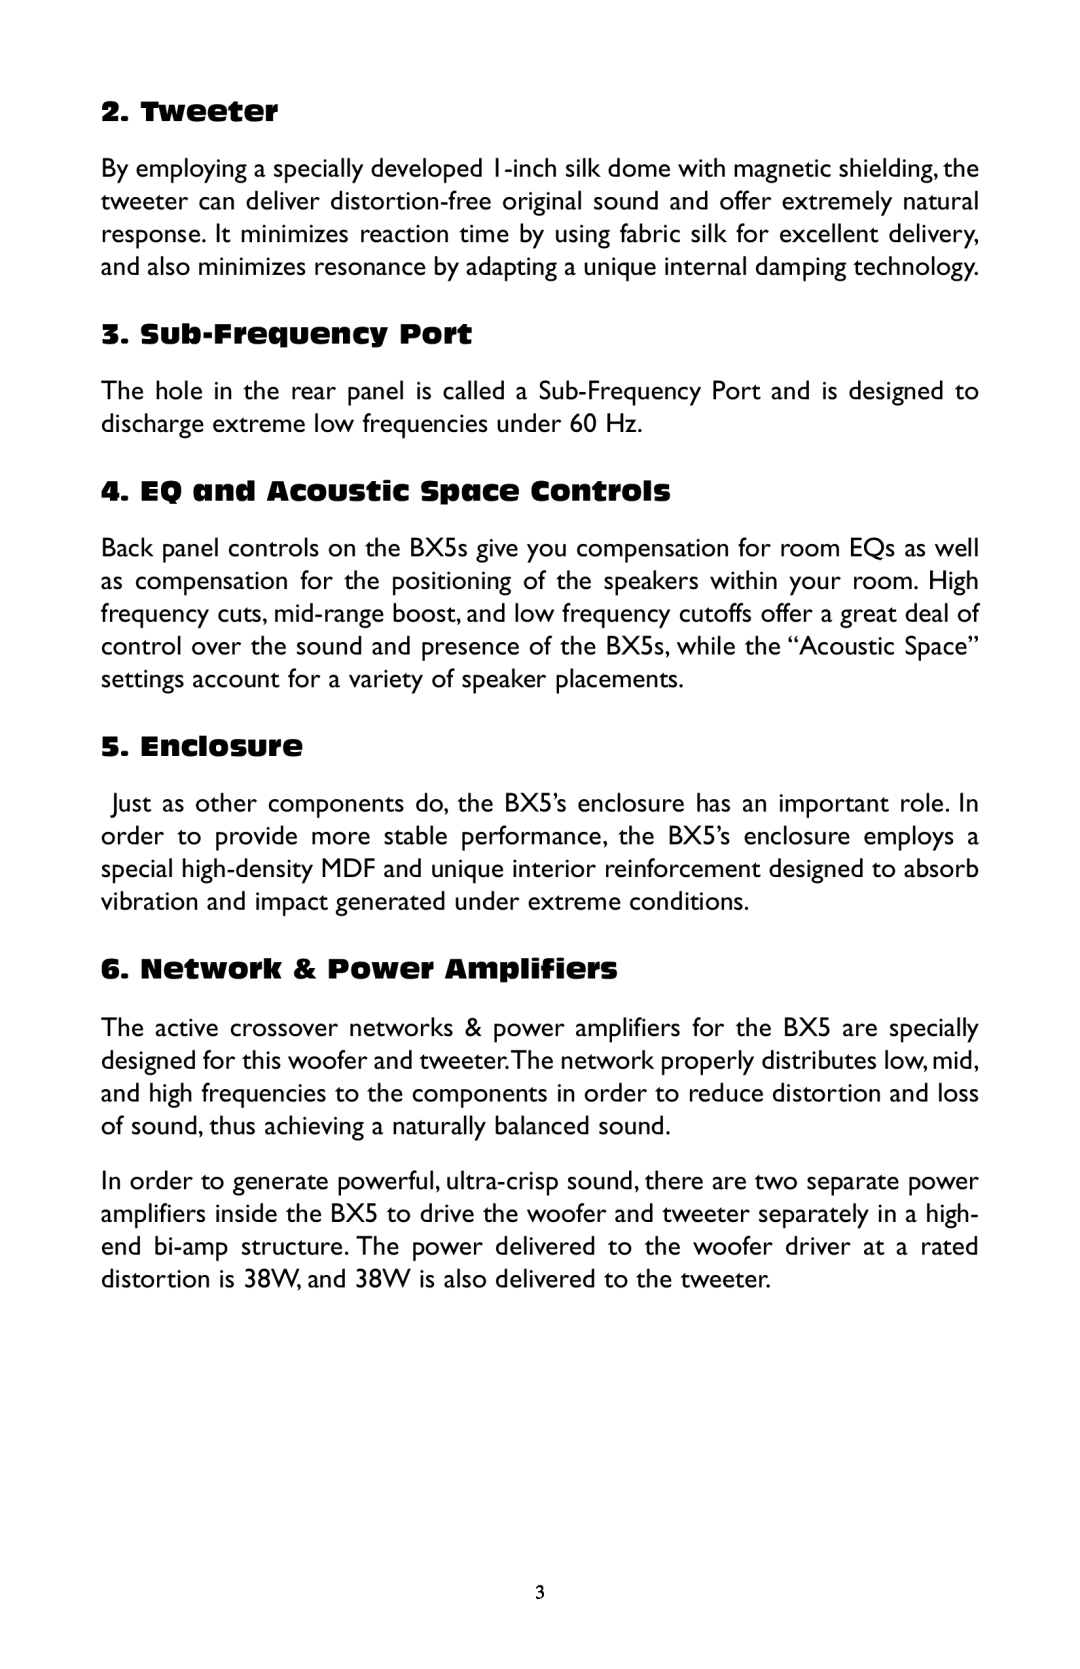 M-Audio BX5 user manual Tweeter, Sub-FrequencyPort, EQ and Acoustic Space Controls, Enclosure, Network & Power Amplifiers 